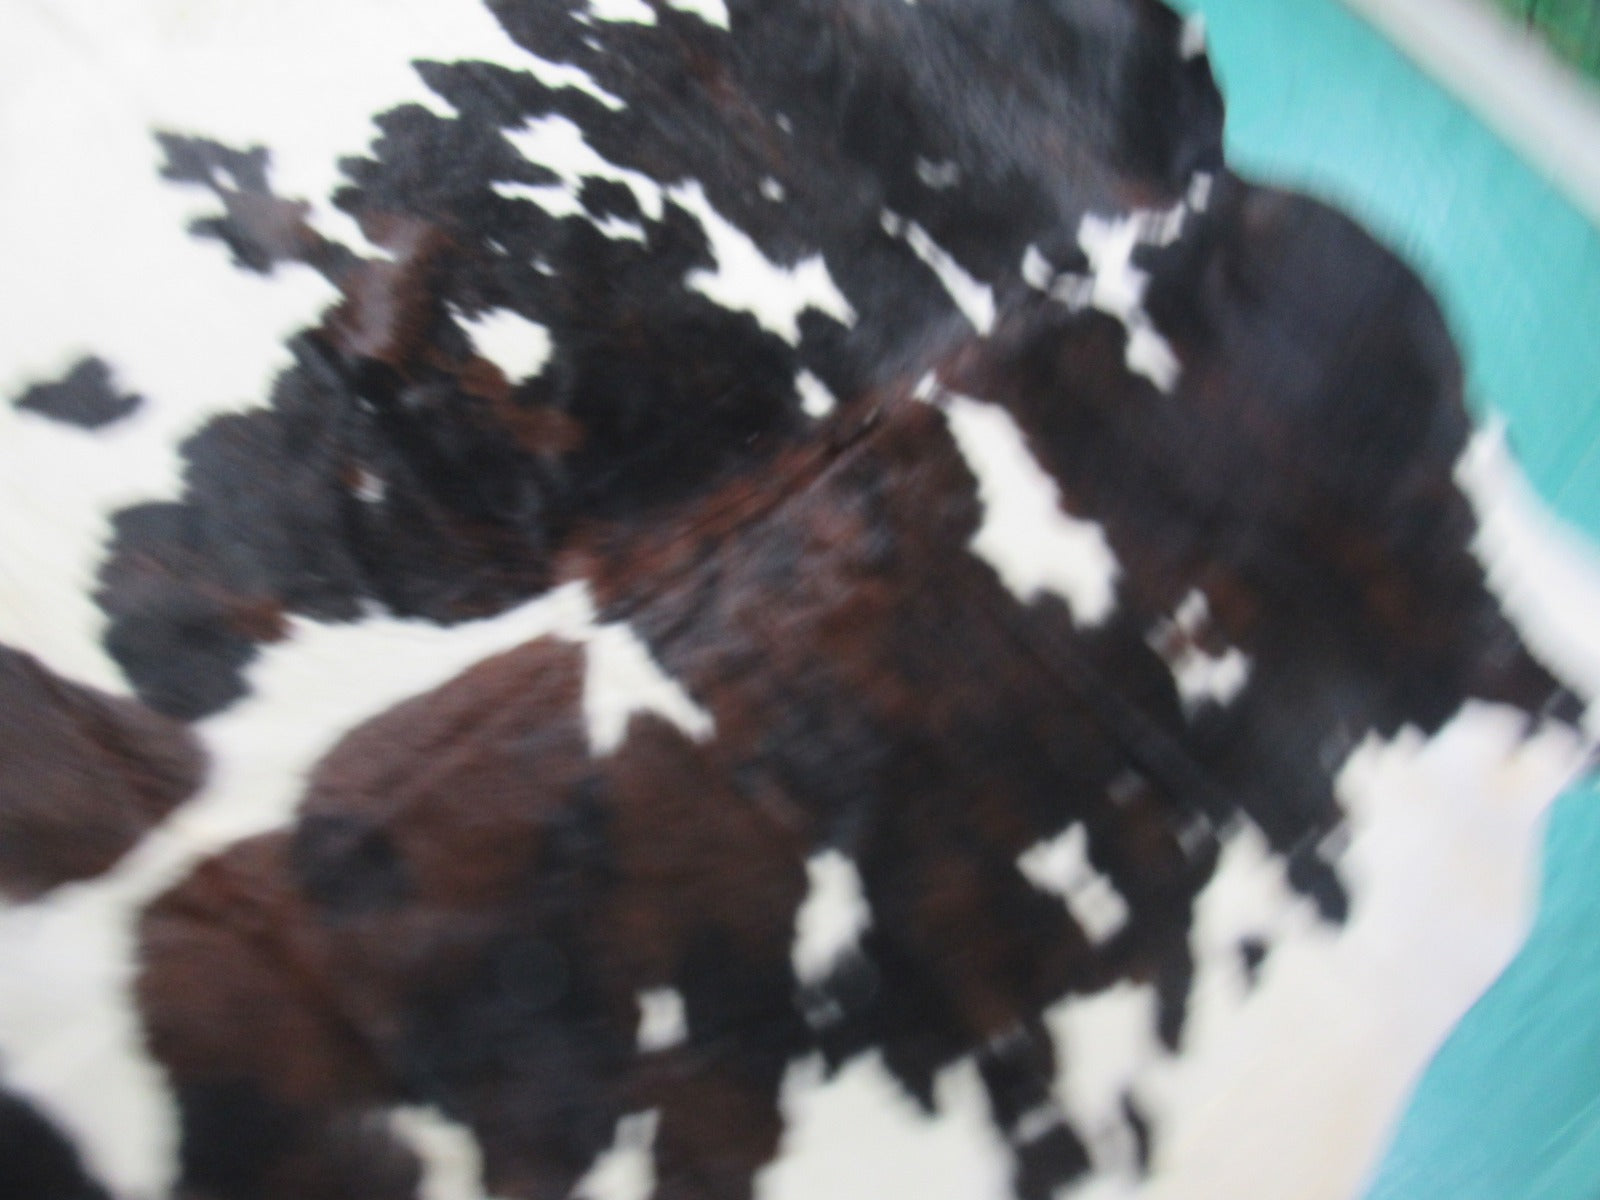 Tricolor Cowhide Rug (mainly dark tones) Size: 6.7x6.7 feet M-1394